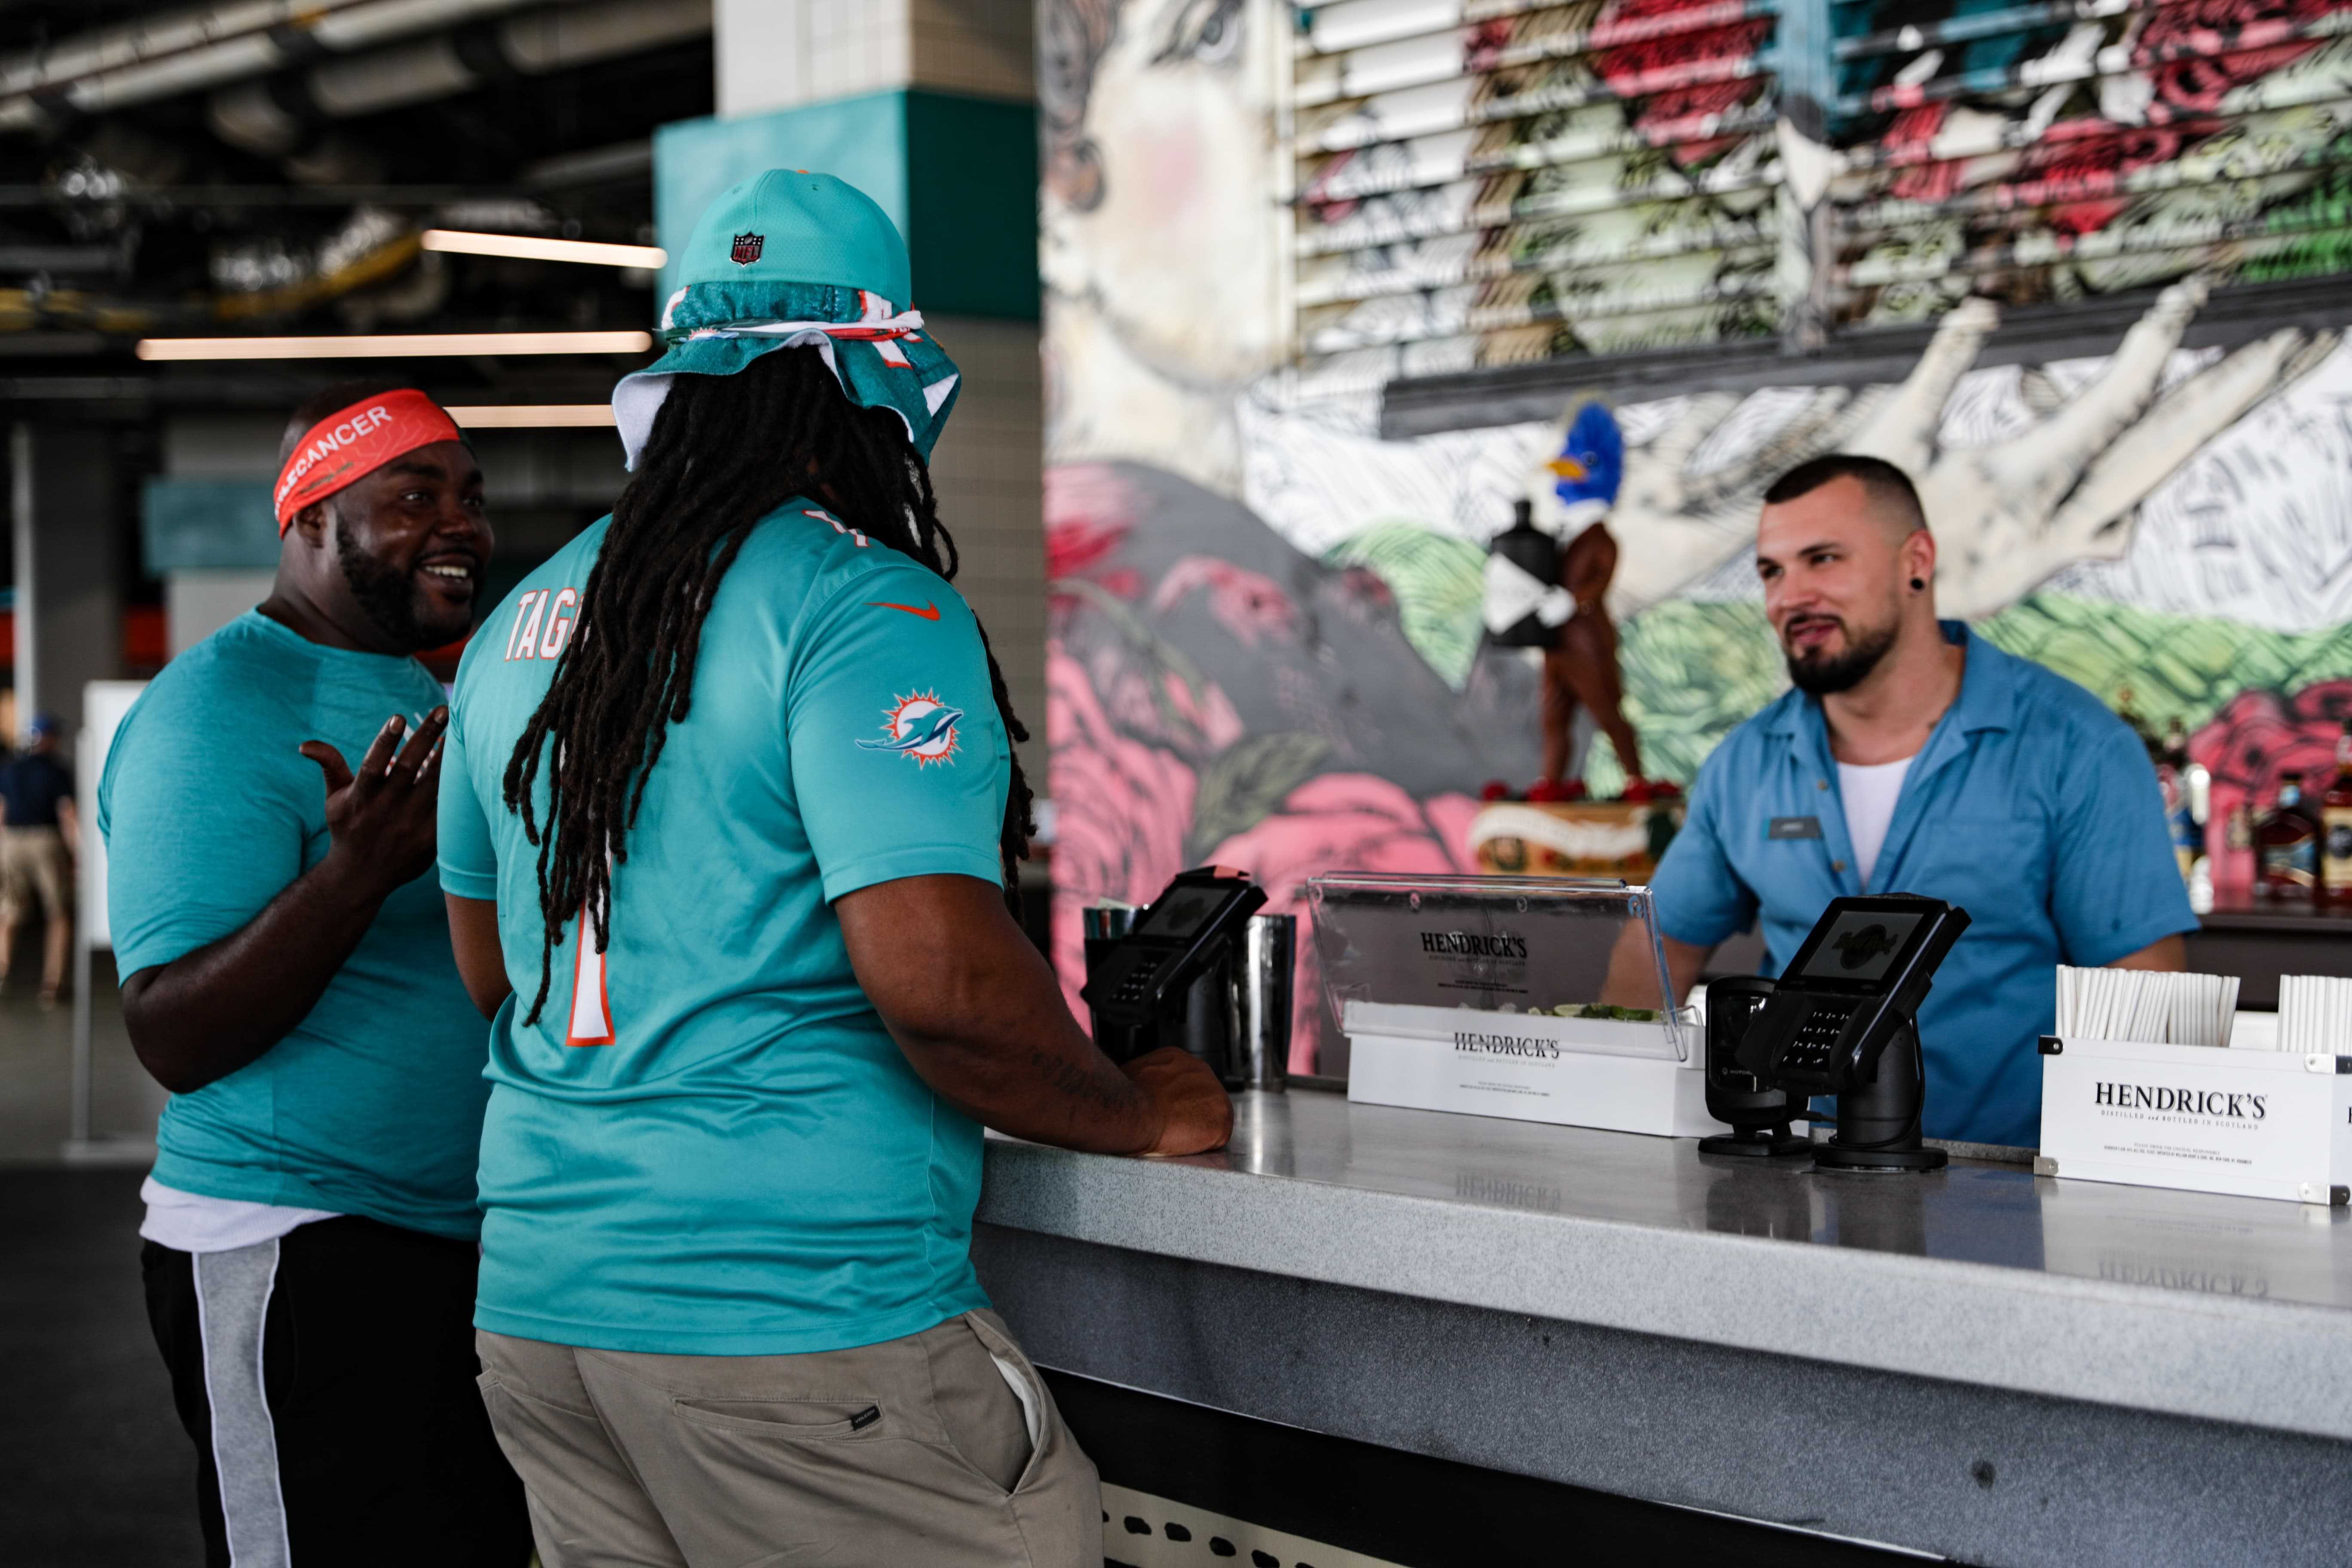 Miami Dolphins fans being served at Hard Rock Stadium concession stand